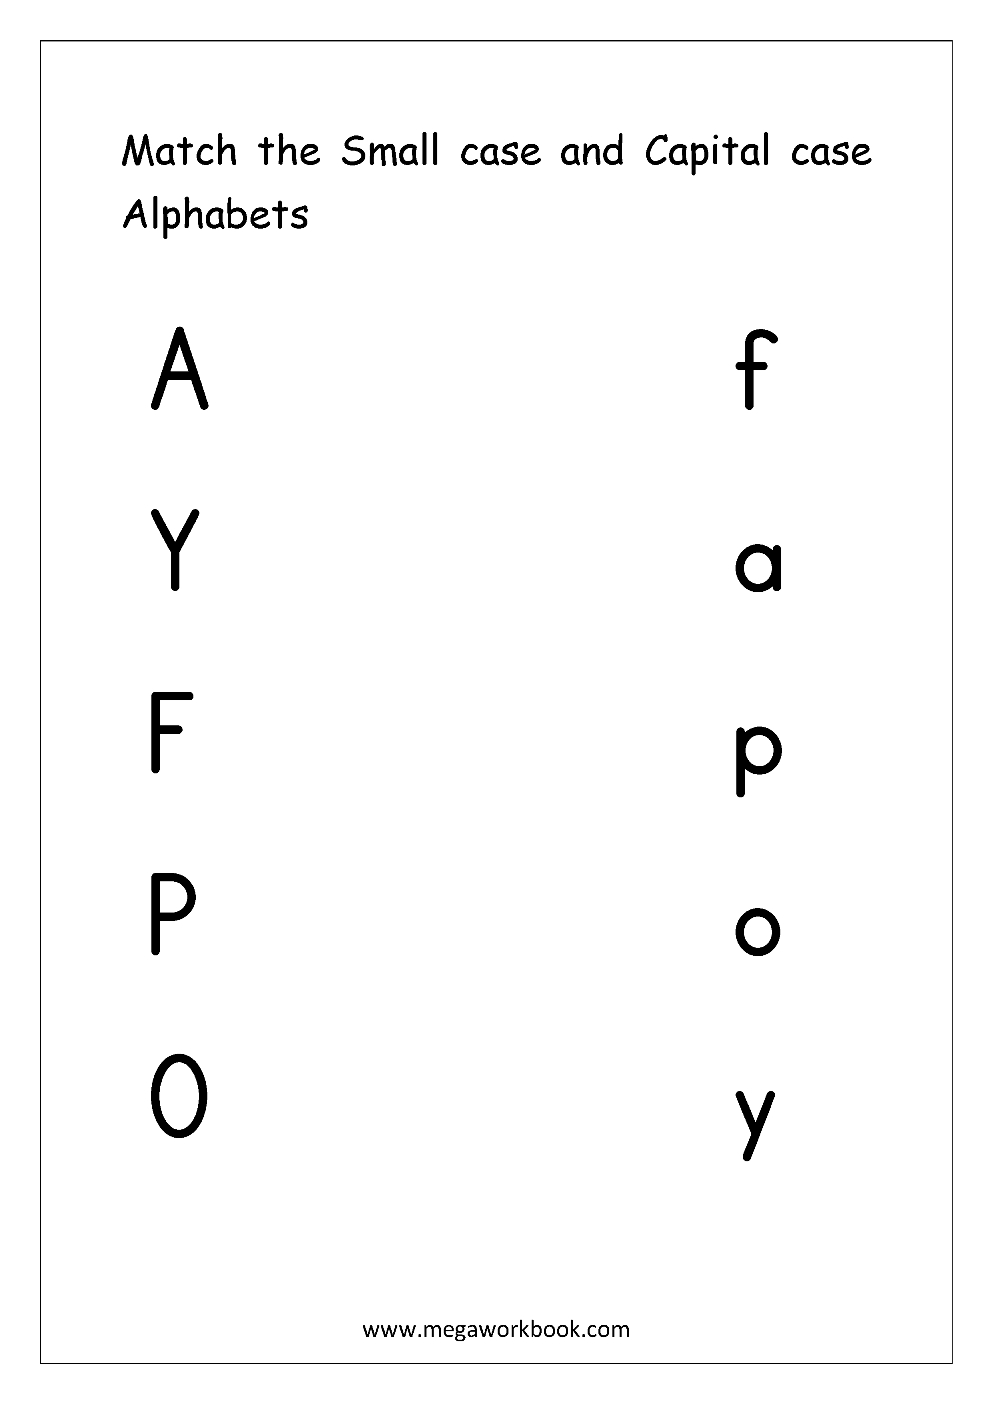 Free English Ets Alphabet Matching Megaworkbook And in Alphabet Match Up Worksheets